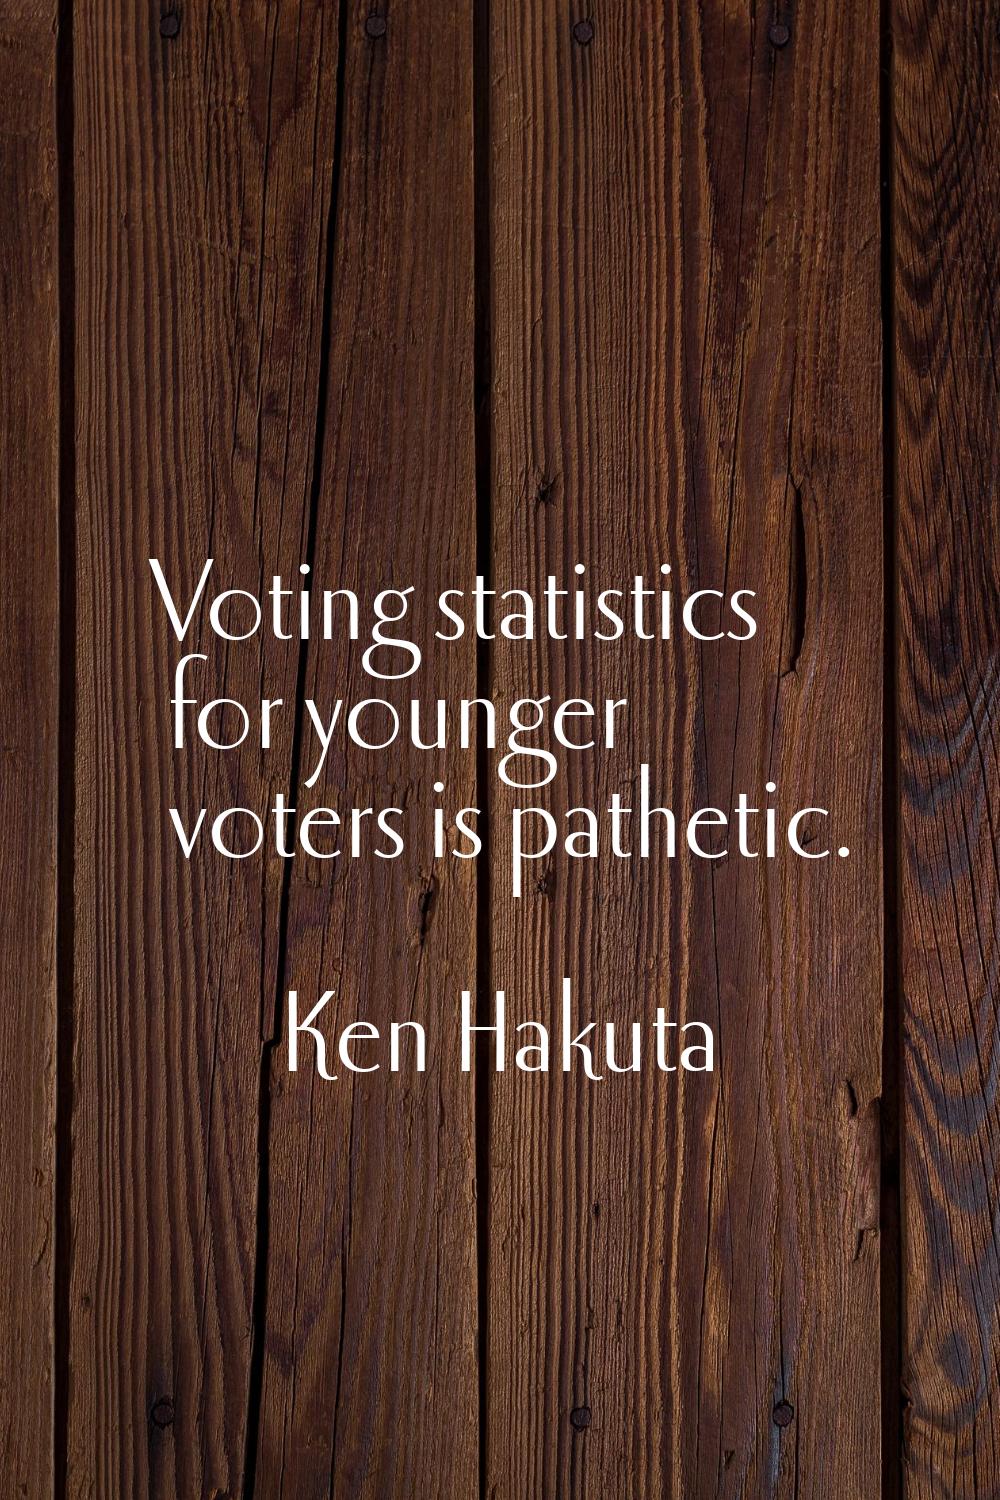 Voting statistics for younger voters is pathetic.